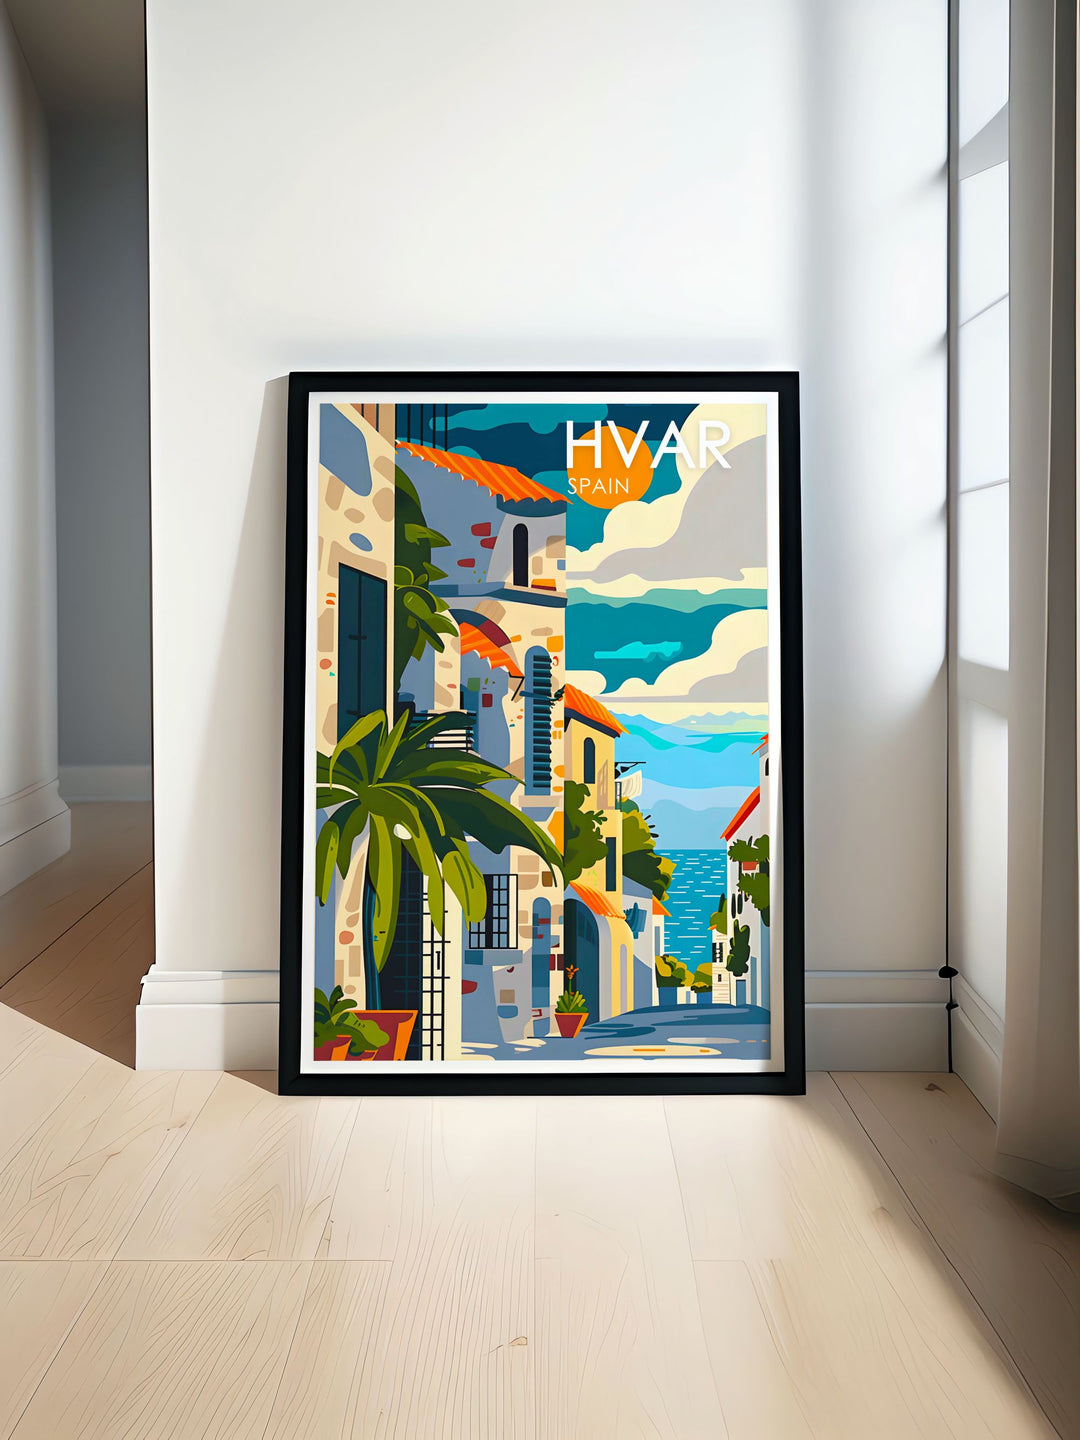 Framed art featuring the panoramic views of Hvar, including its historic buildings and vibrant harbor. This print adds a touch of Adriatic charm to any room, celebrating the scenic beauty of Croatias coast.